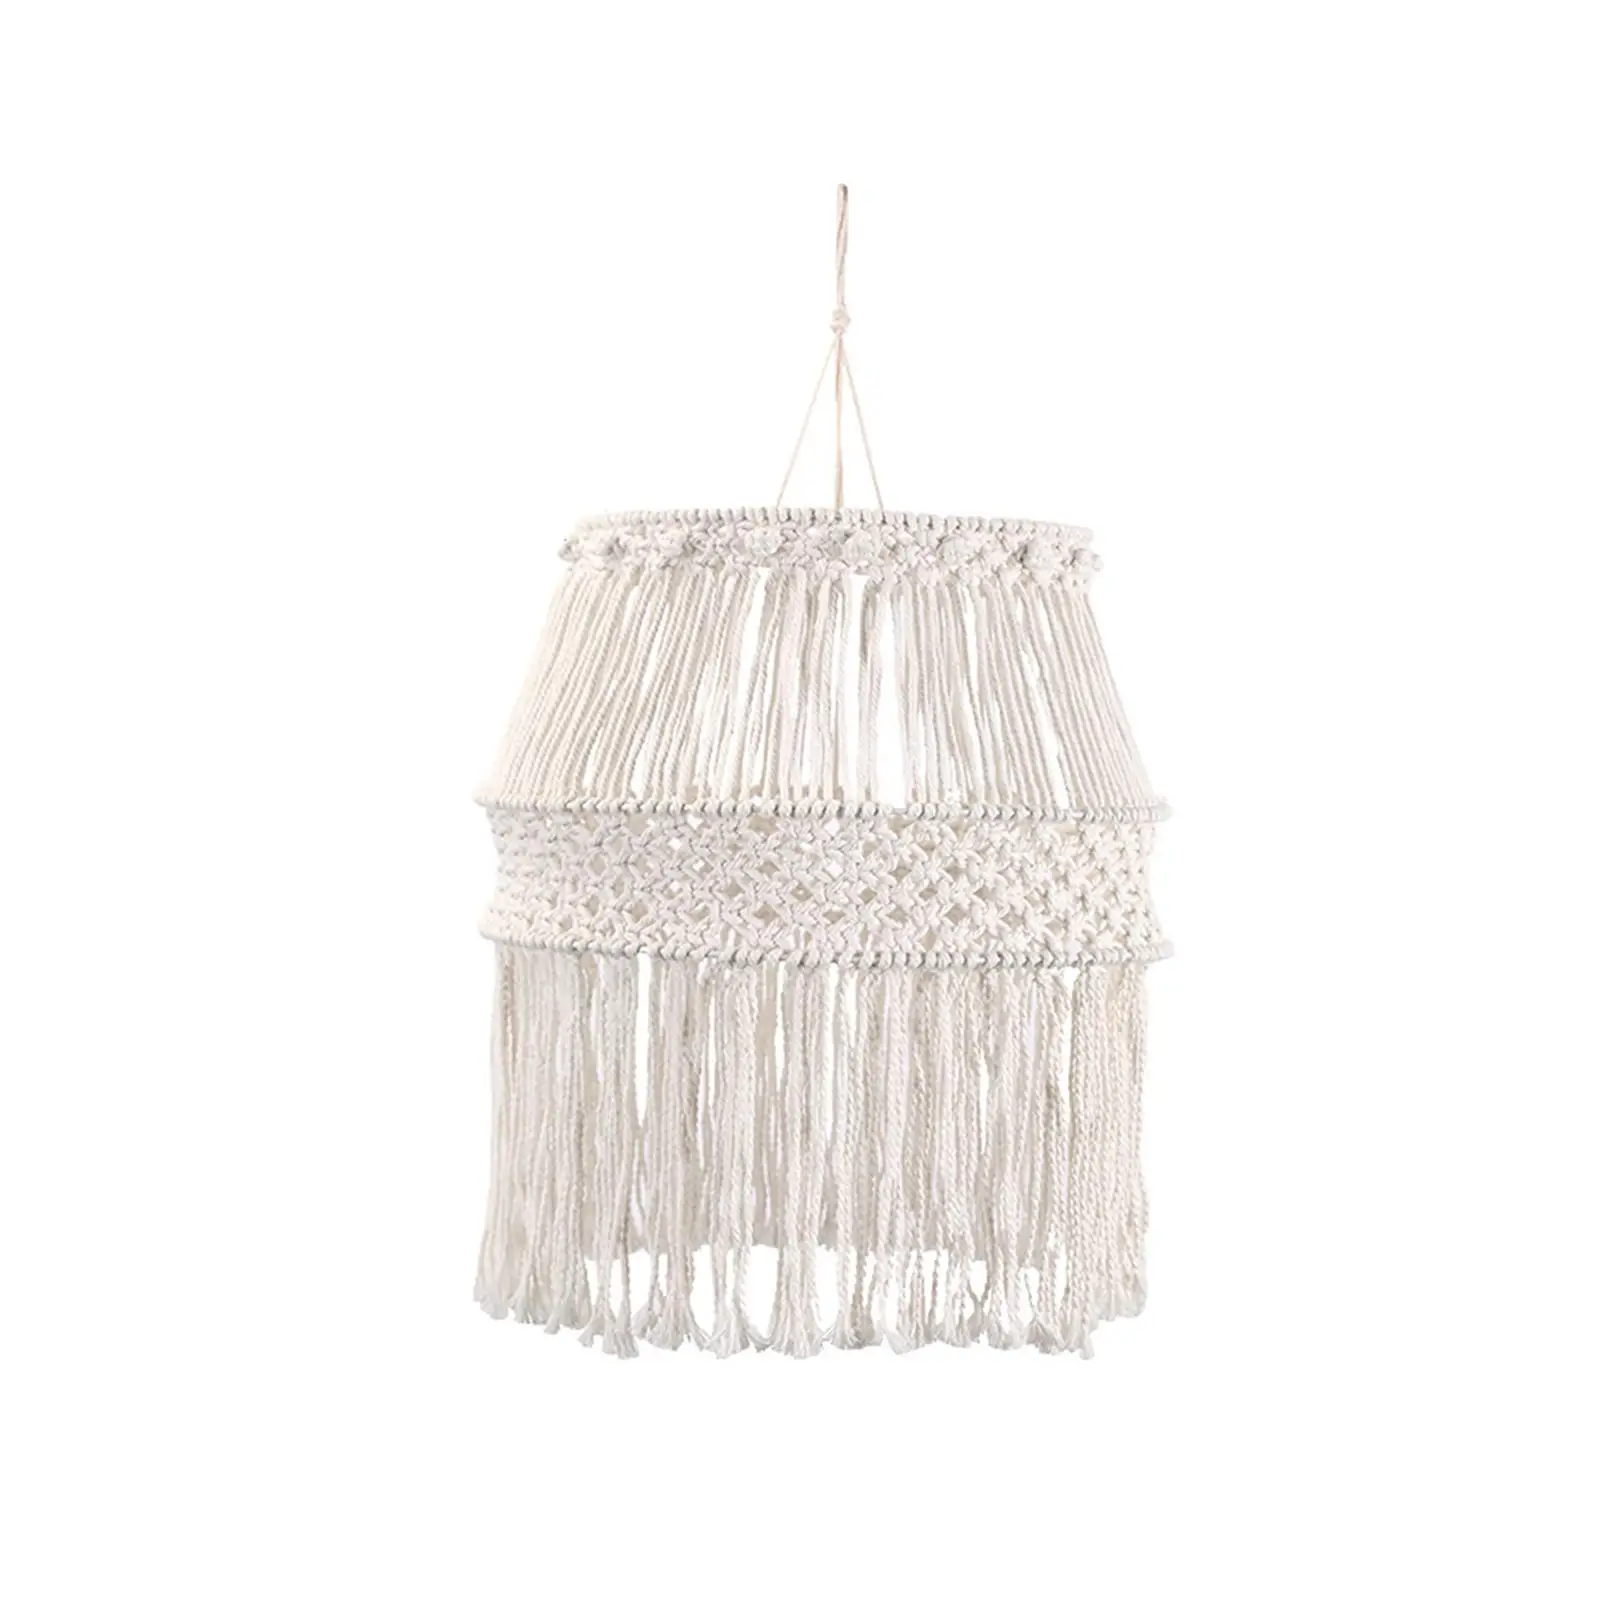 Macrame Lamp Shade Bohemian Style Woven Light Cover Hanging Lampshade Pendant Light Shade Only for Living Room Party Decoration